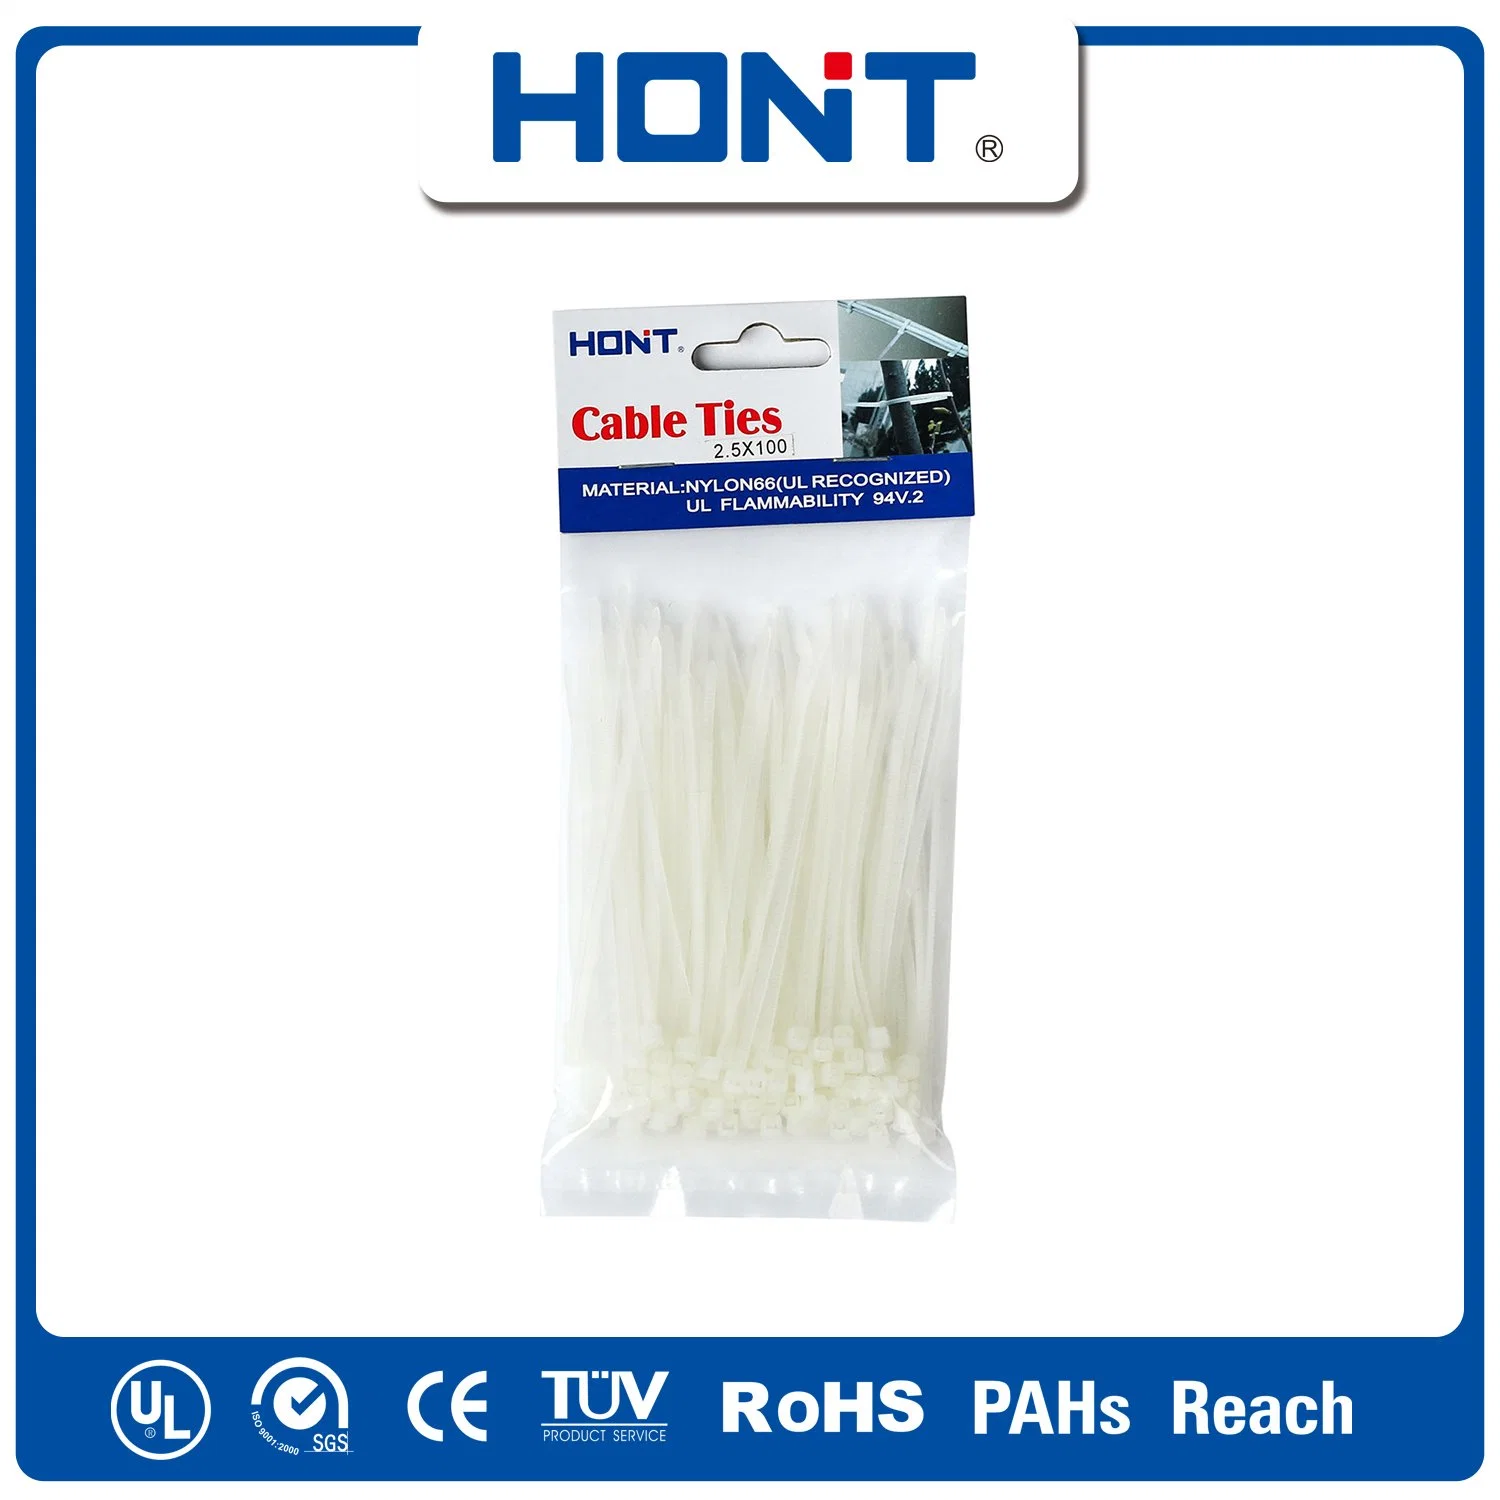 SGS Approved Hont Plastic Bag + Sticker Exporting Carton/Tray Nylon Tie Cable Accessories